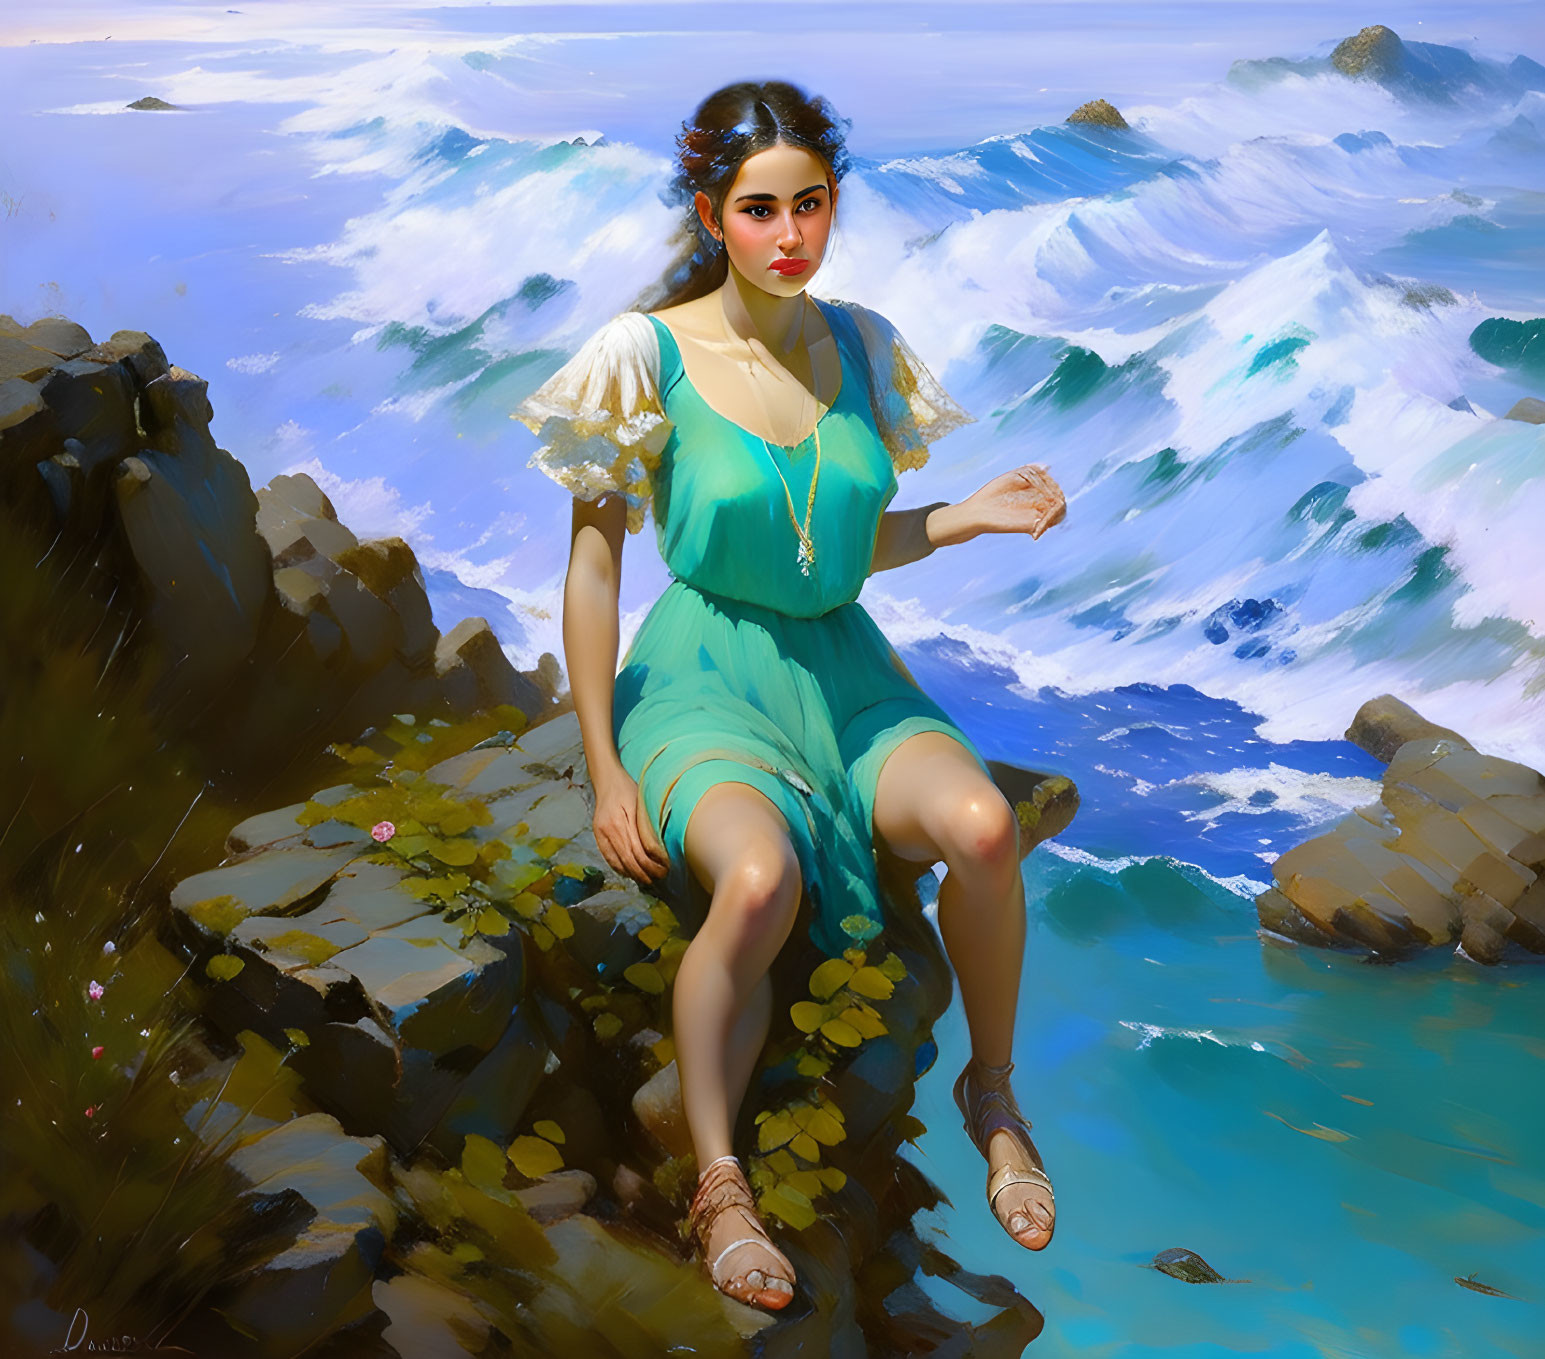 Woman on a rock by the sea